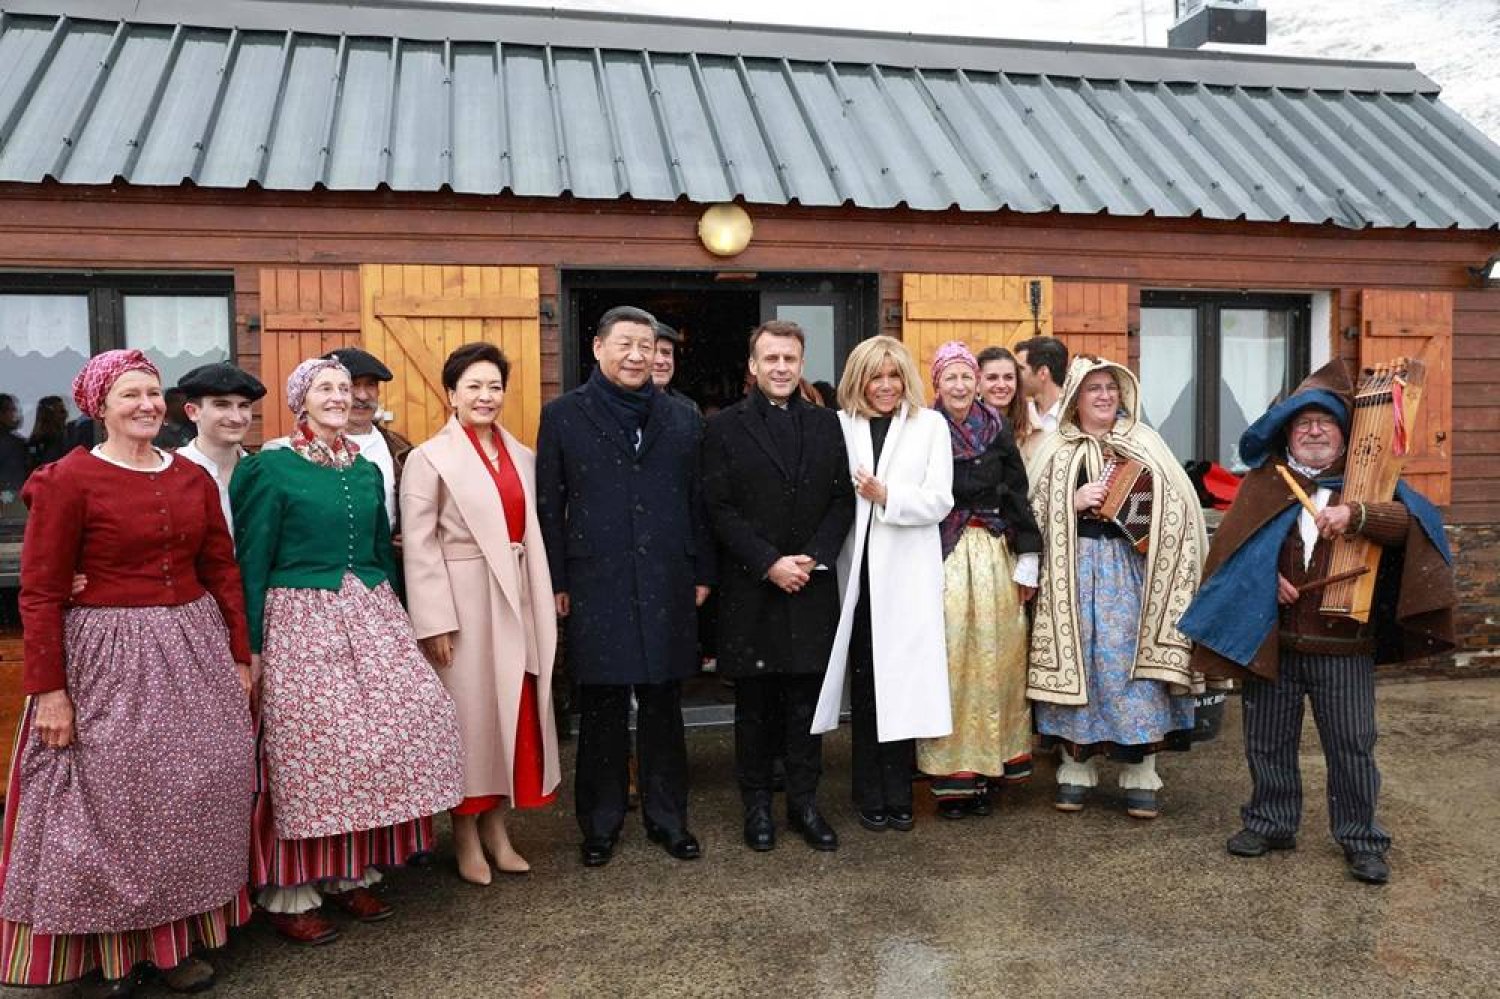 French President Emmanuel Macron (C-R) and his wife Brigitte Macron (4thR), Chinese President Xi Jinping (C-L) and his wife Peng Liyuan (4thL) pose with folklore dancers at the Tourmalet pass, in the Pyrenees mountains, as part of his two-day state visit to France, on May 7, 2024. (AFP)